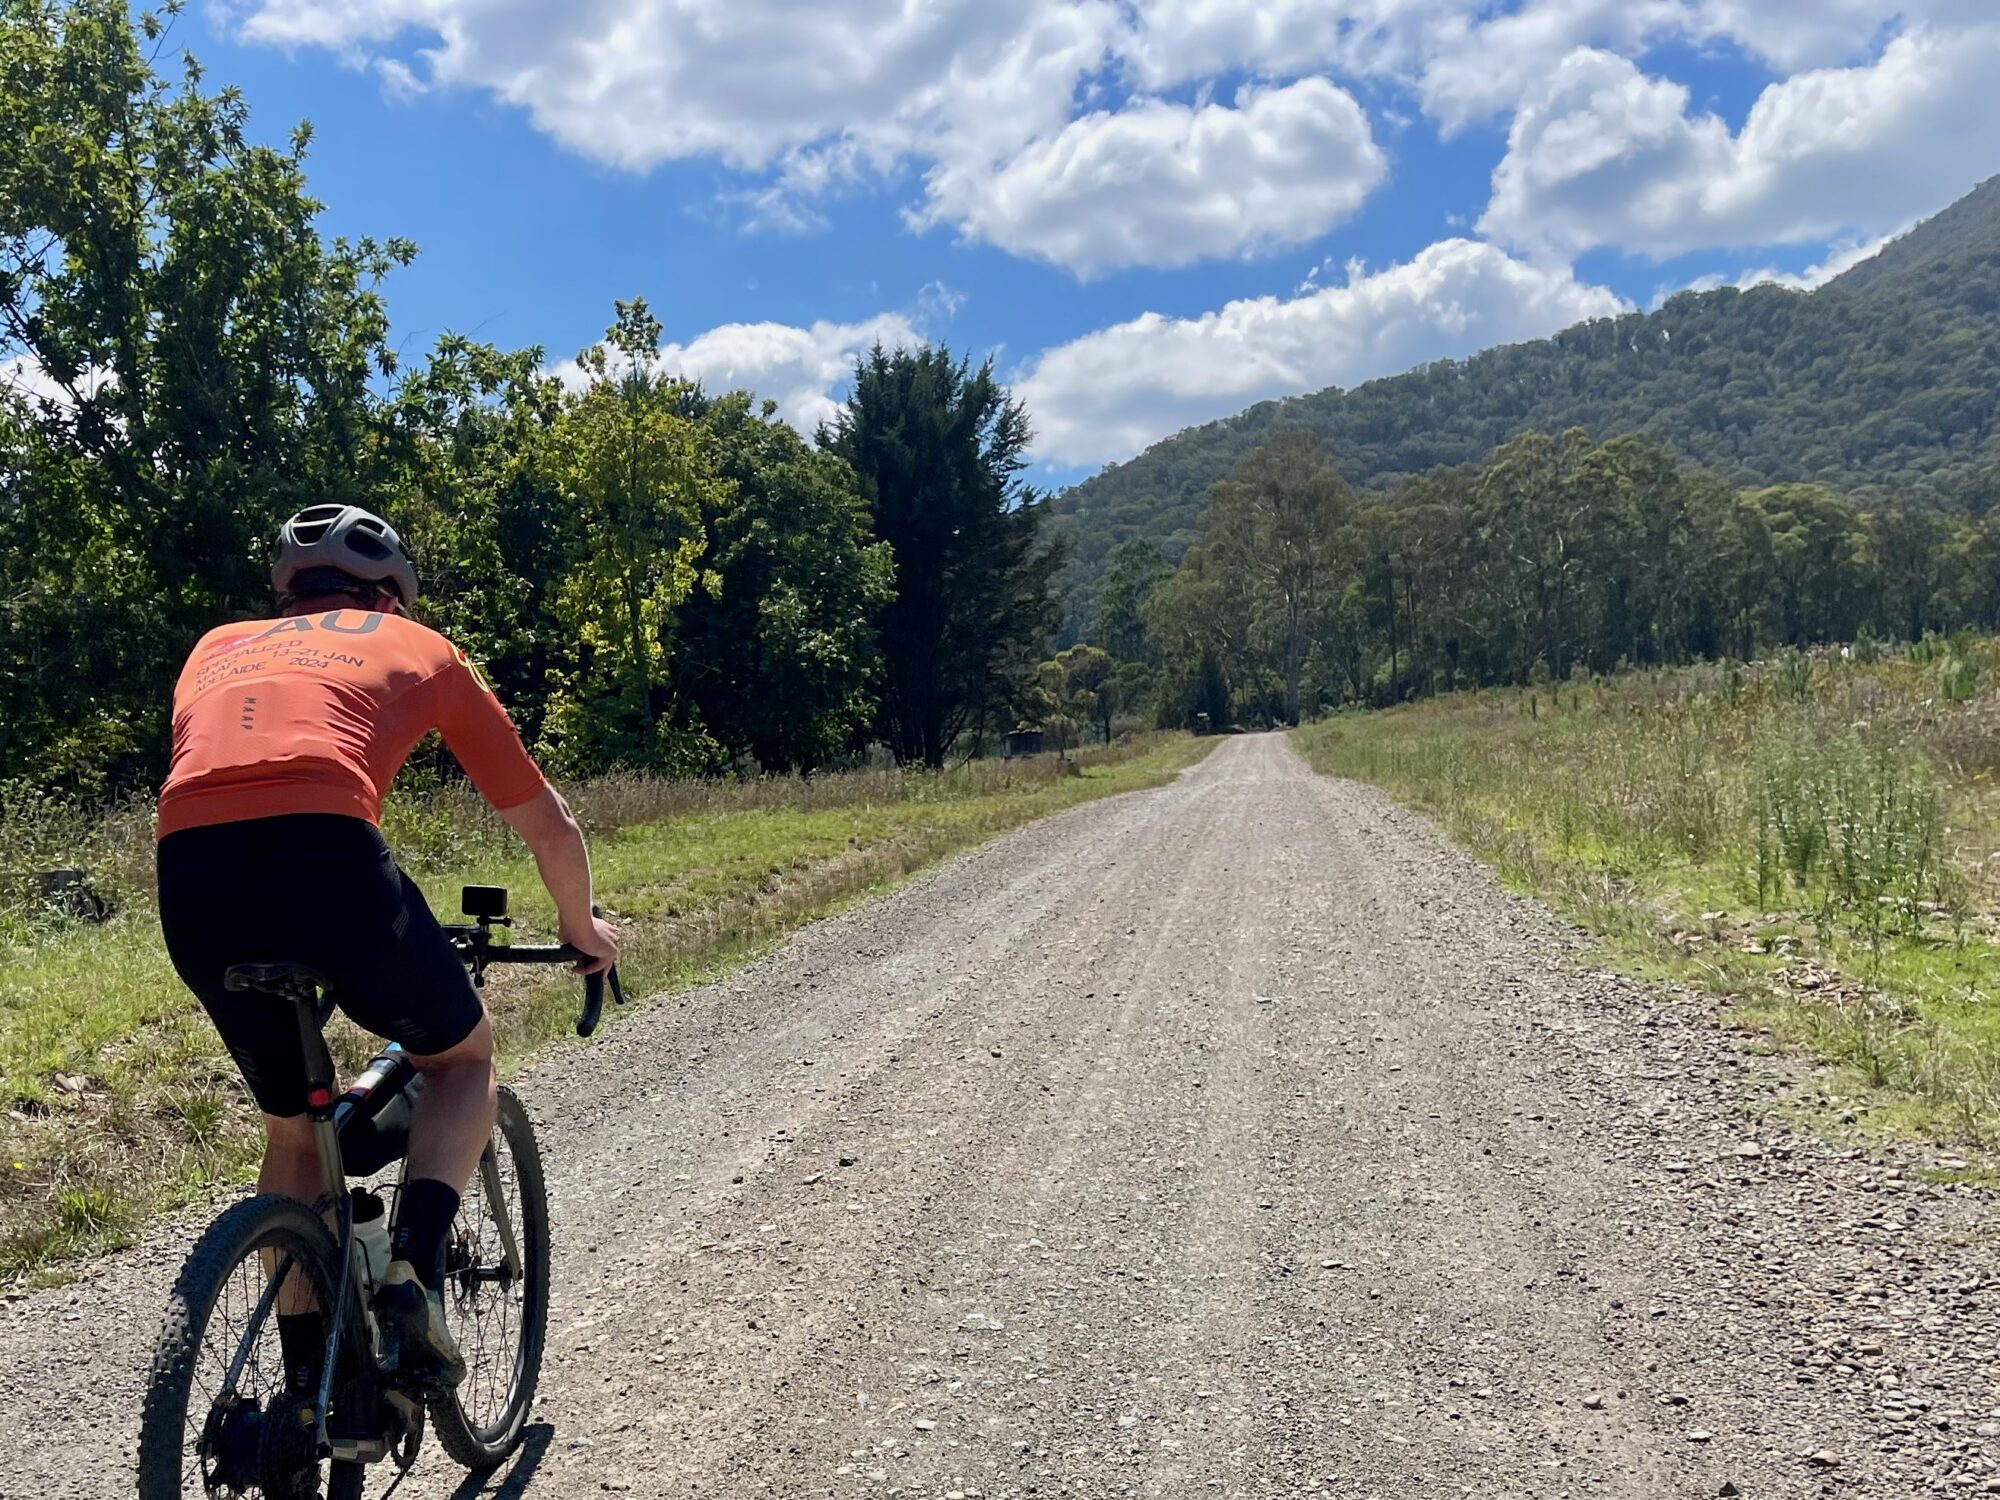 A cyclist riding on a gravel road with native bushland covered mountains in the background on a sunny day